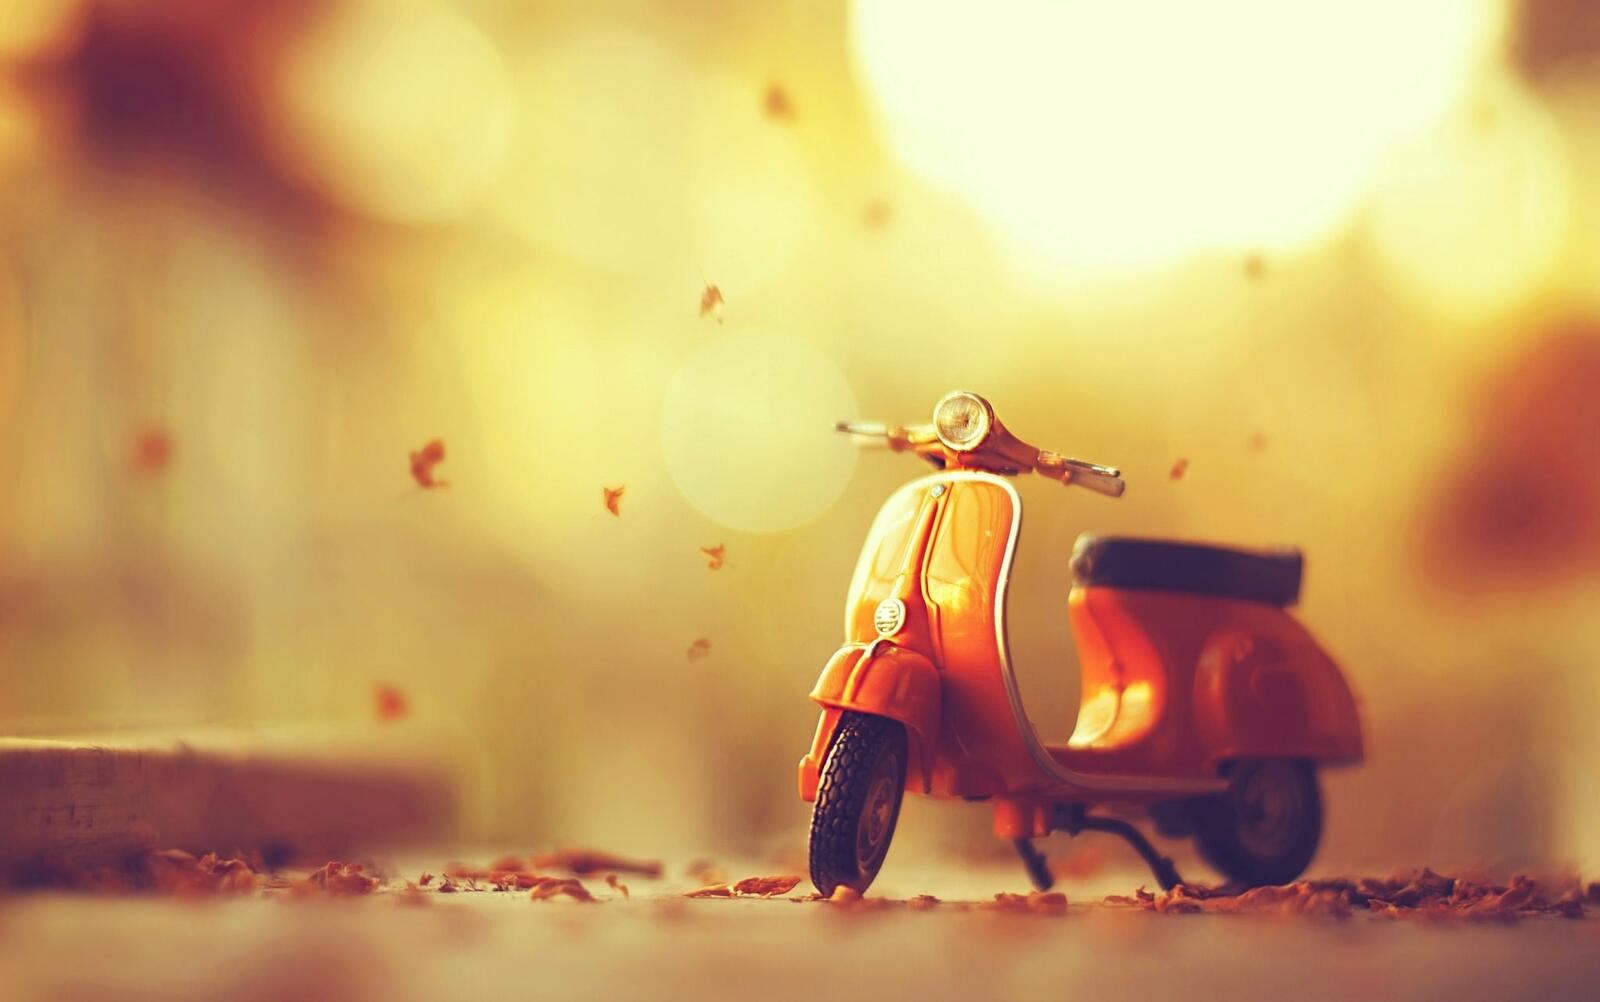 Wallpapers toy scooter motorcycles scooter on the desktop